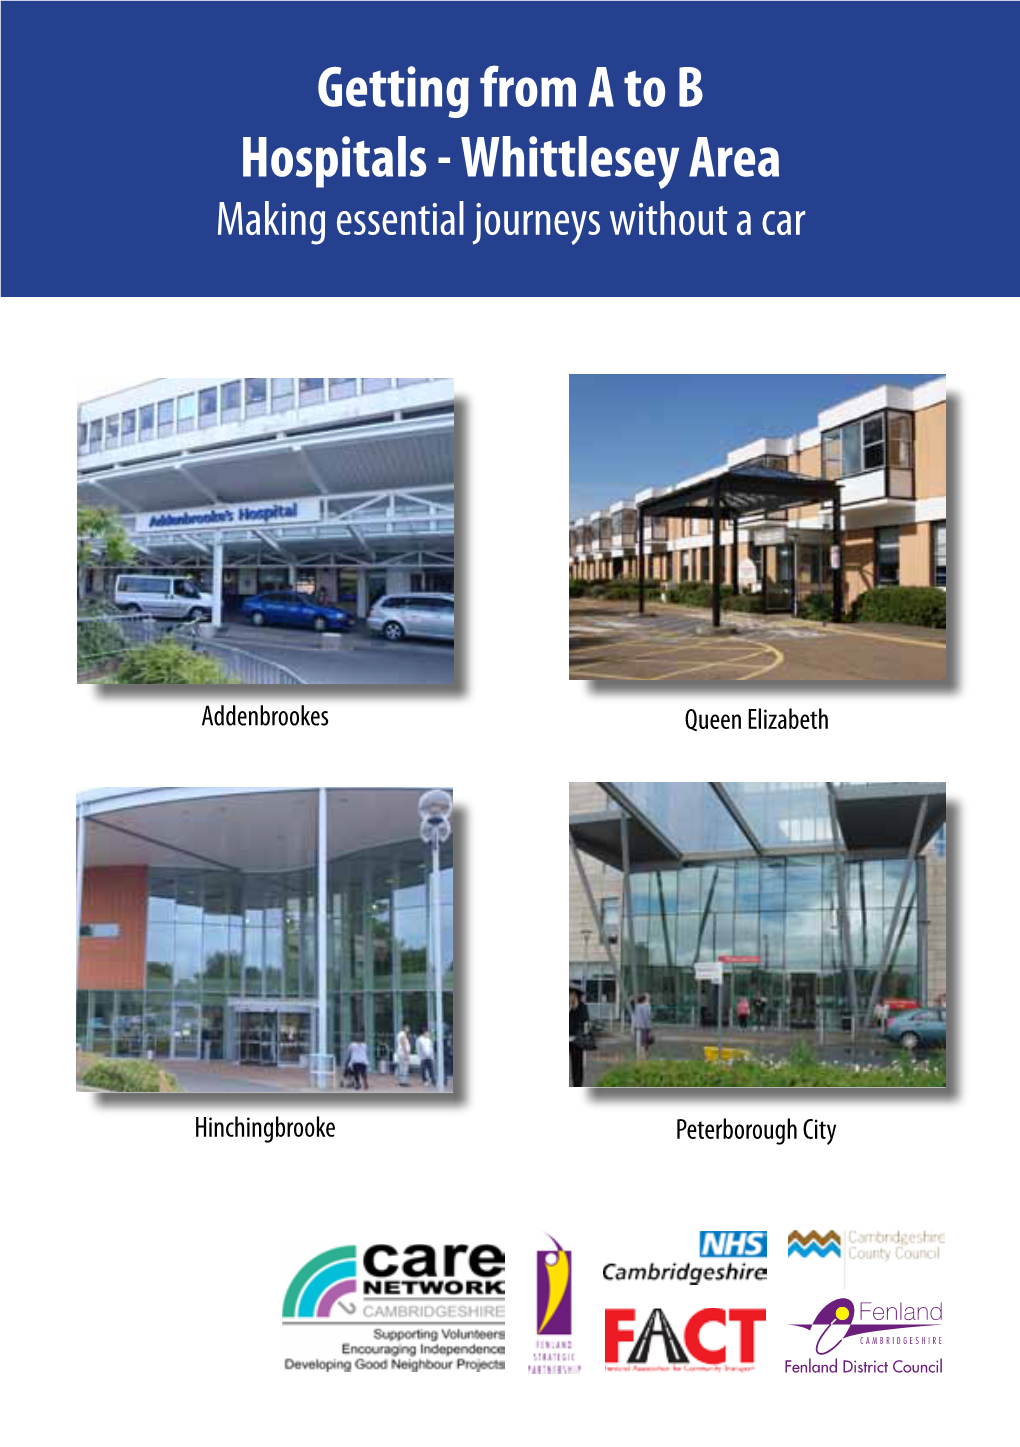 Getting from a to B Hospitals - Whittlesey Area Making Essential Journeys Without a Car